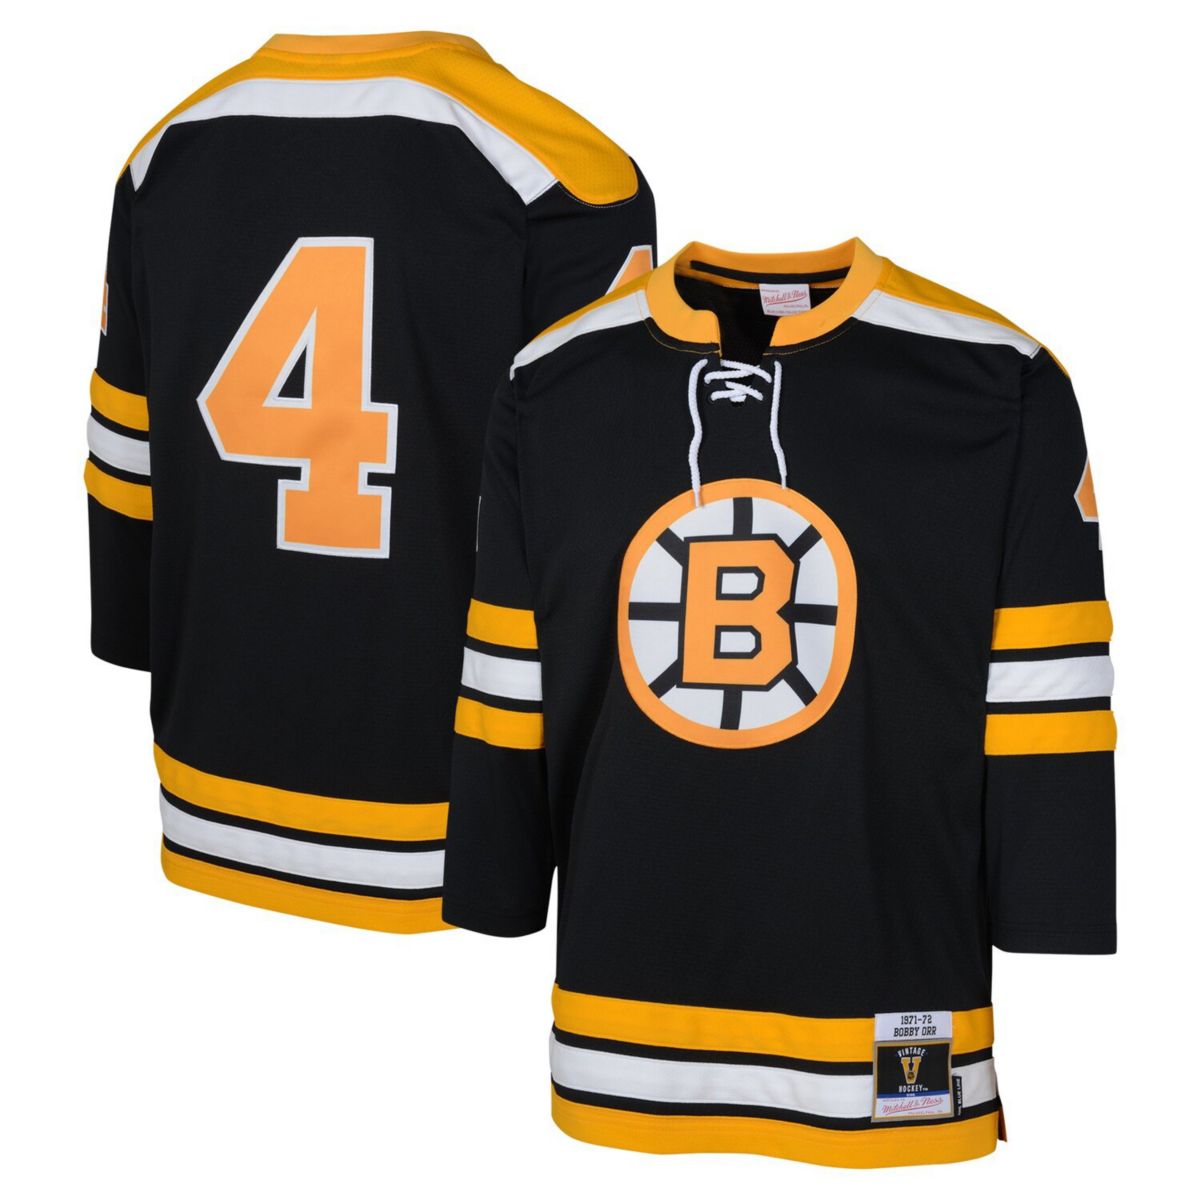 Youth Mitchell & Ness Bobby Orr Black Boston Bruins 1971 Blue Line Player Jersey Unbranded